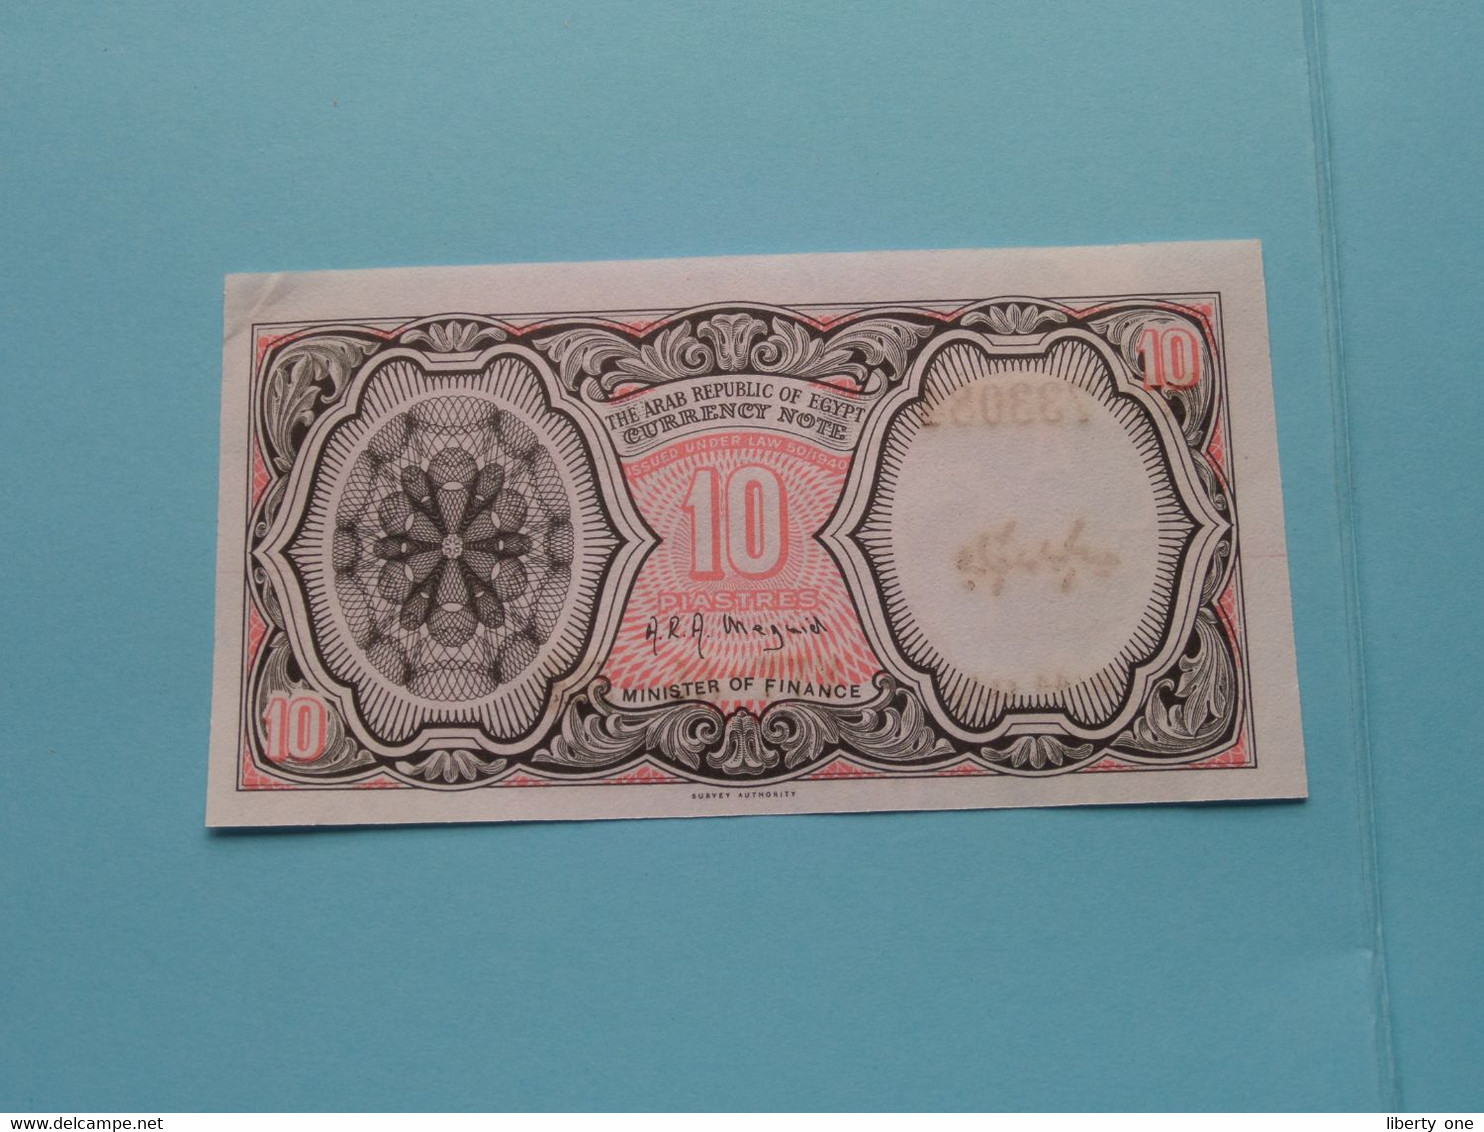 10 Piastres > The Arab Republic Of EGYPT Currency Note N° 733084 - B/44 ( For Grade, Please See Photo ) UNC > Egypt ! - Egypt